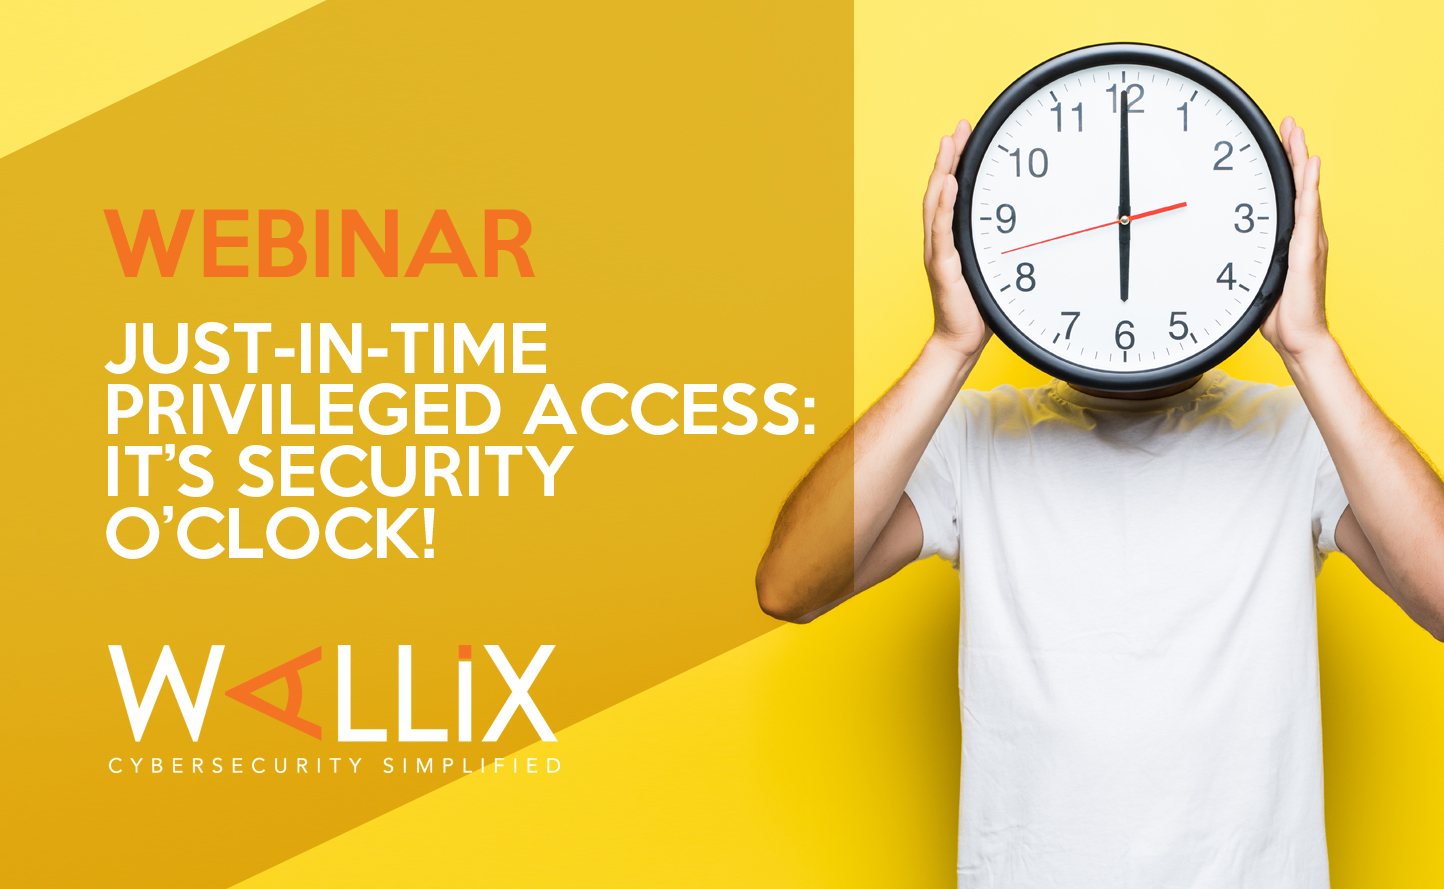 Just-In-Time Privileged Access: It’s security o’clock!